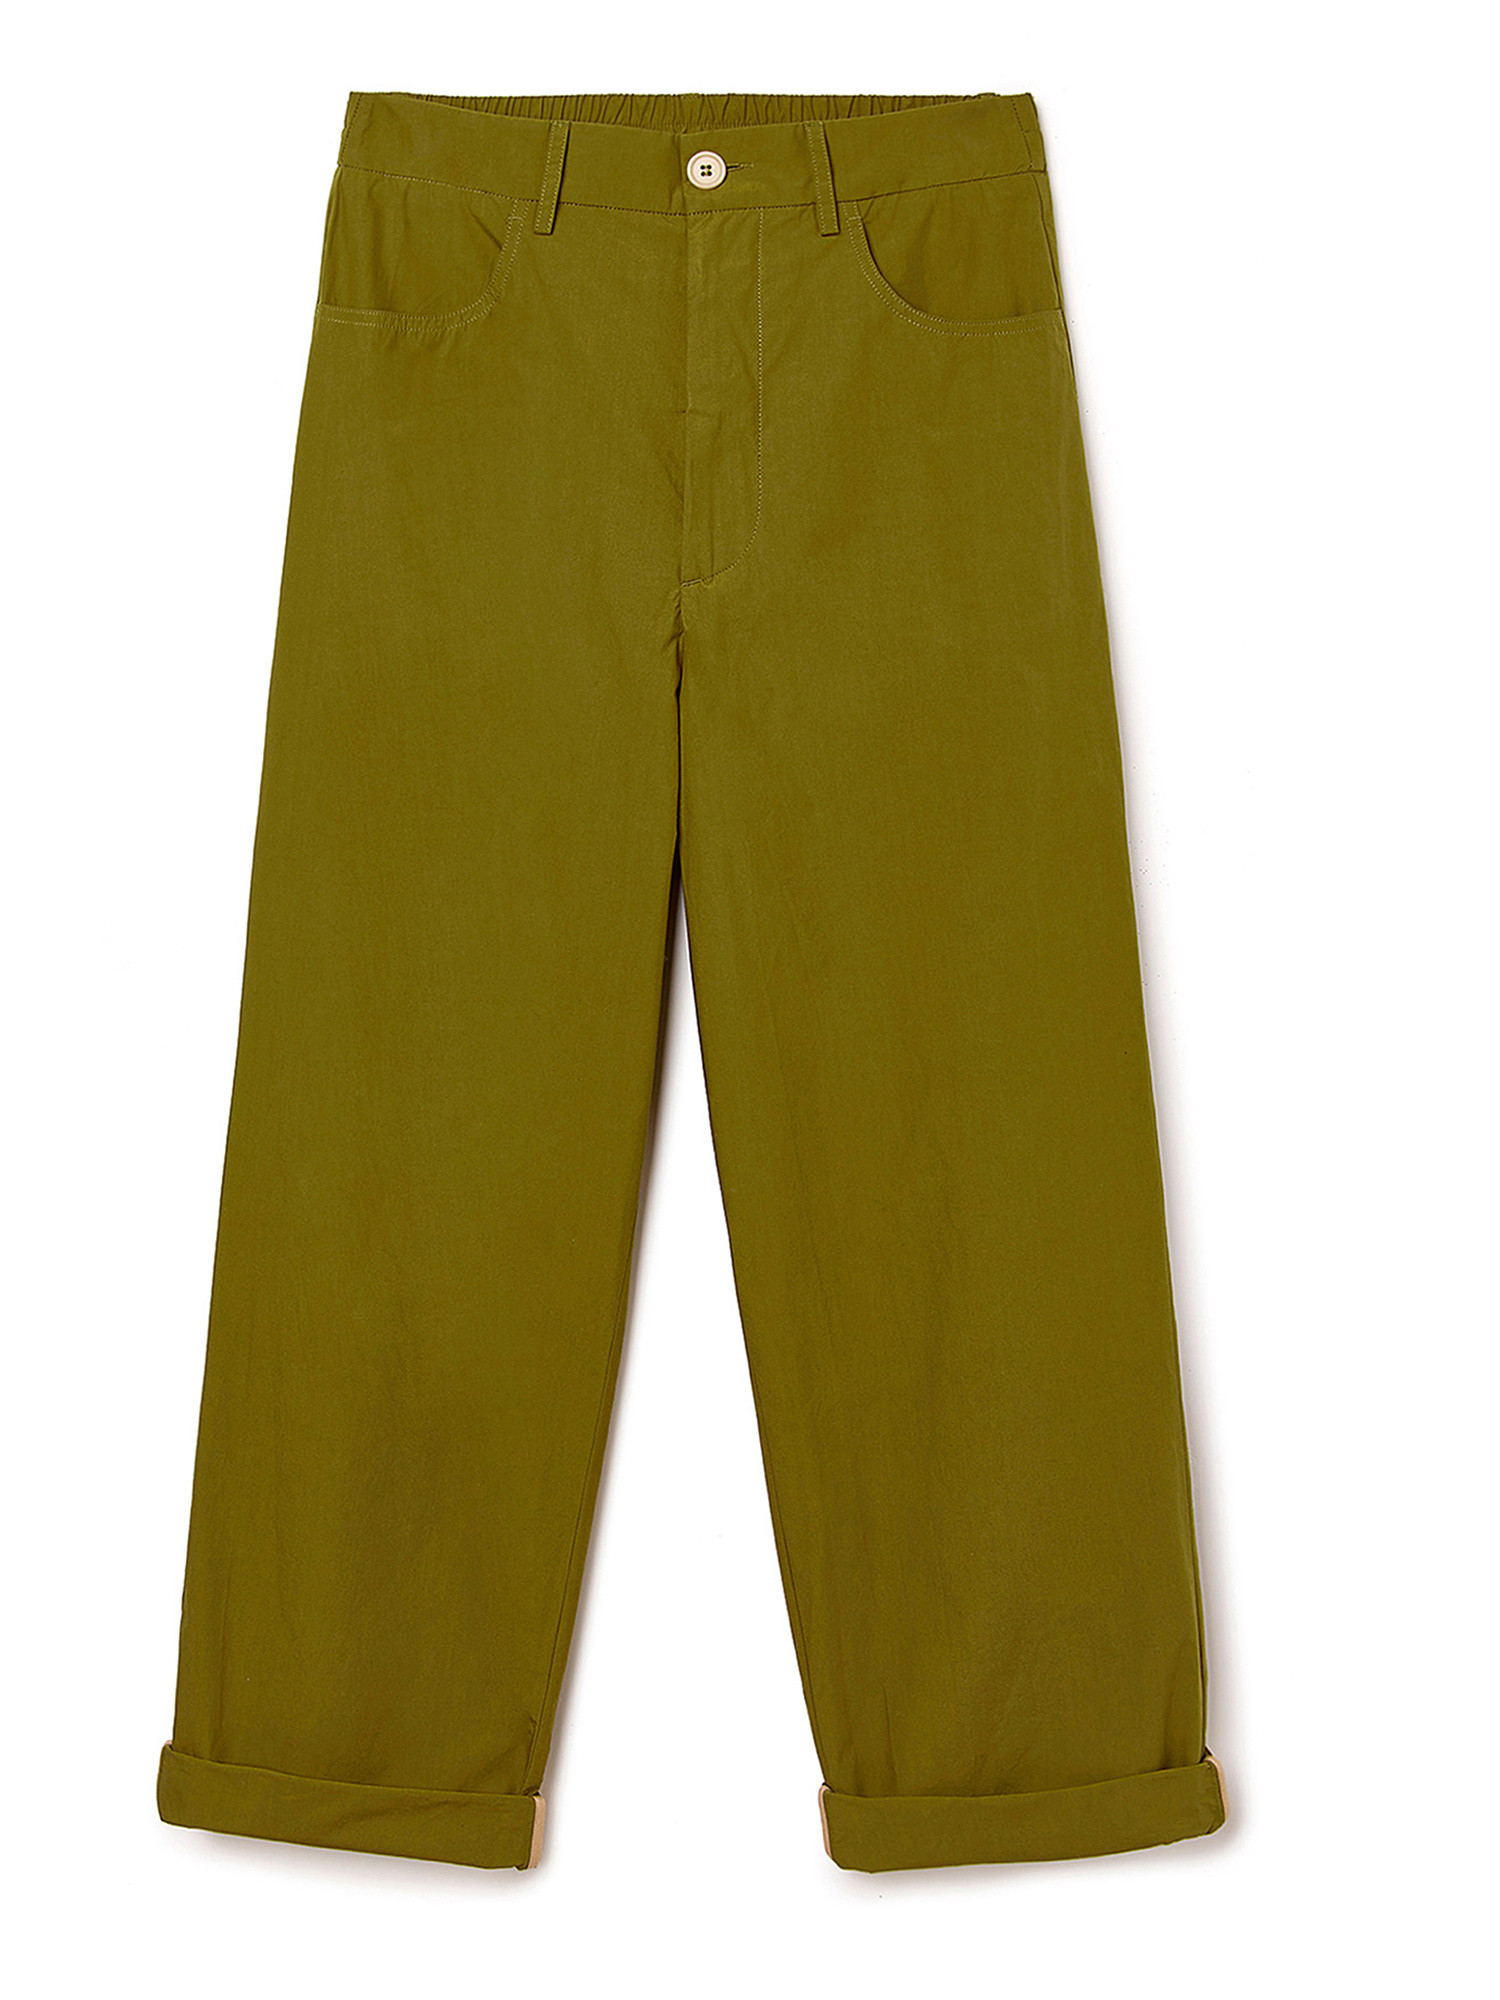 Delaware trousers in cotton poplin, Green, large image number 3